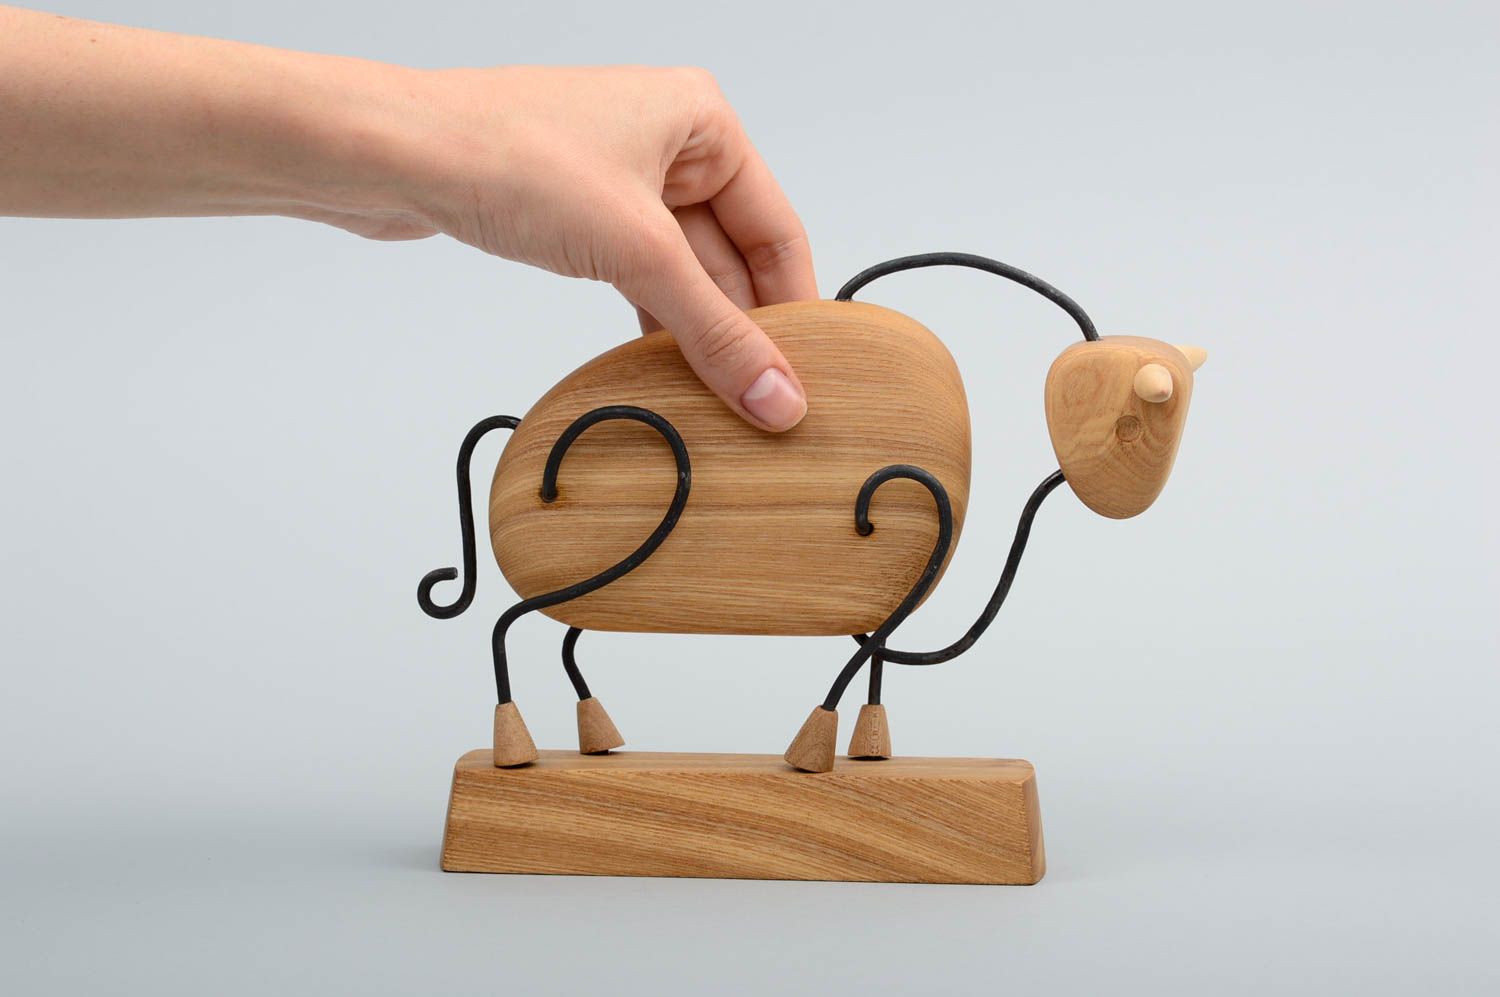 Handmade wood sculpture table decorating ideas wooden gifts animal figurines photo 5